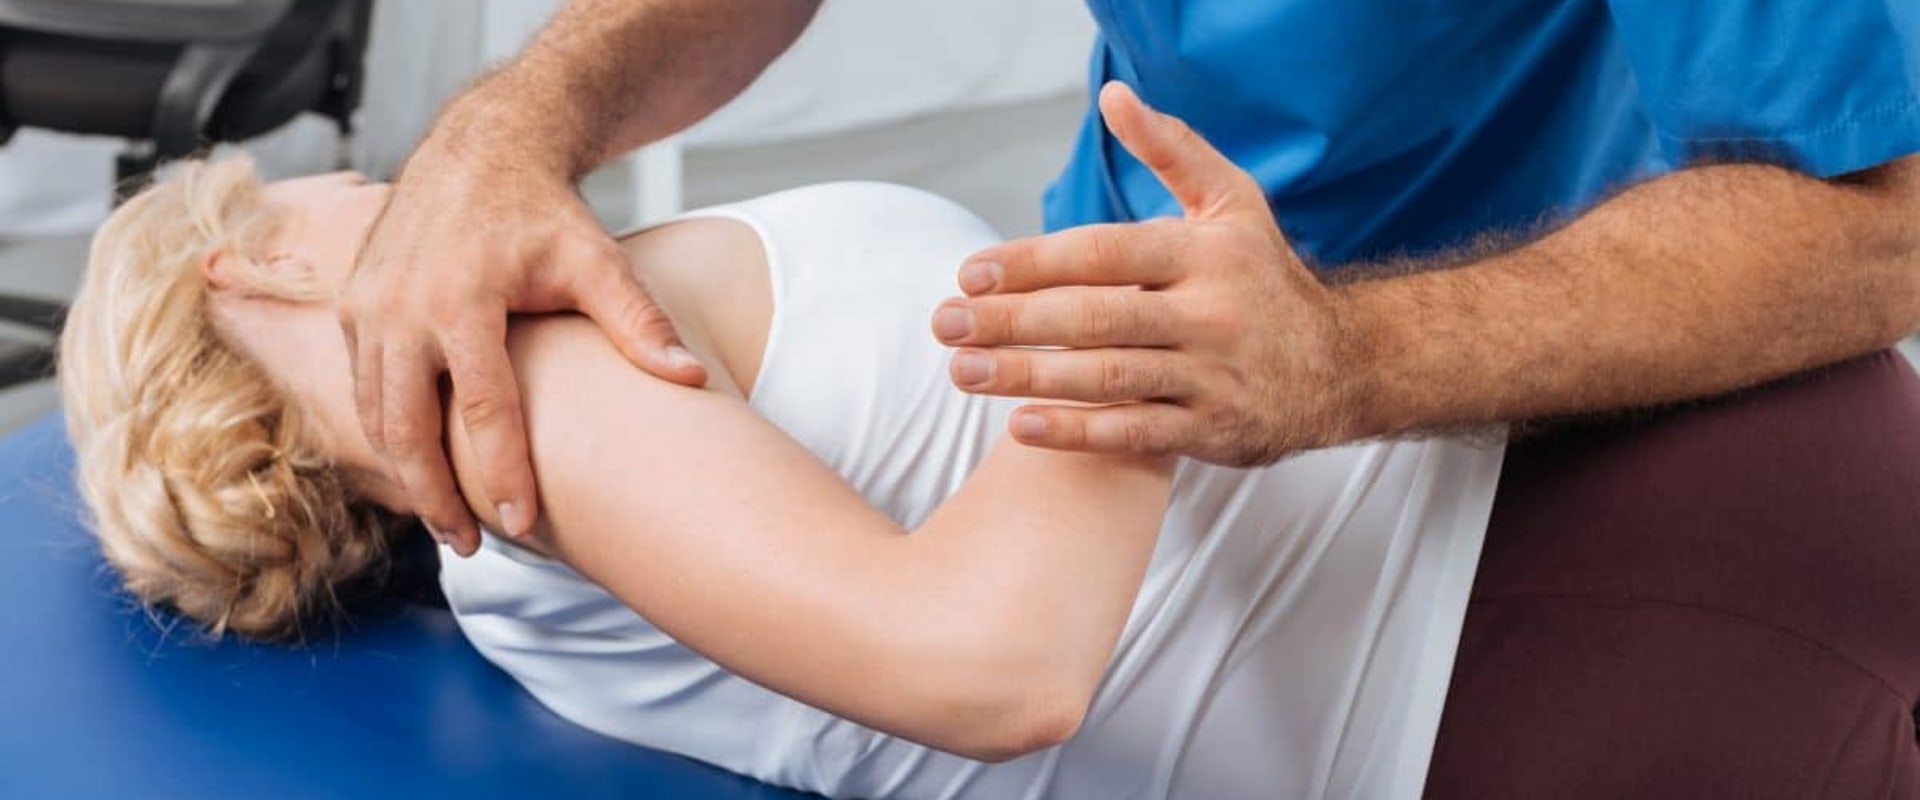 How Often Should You Receive Chiropractic Care?